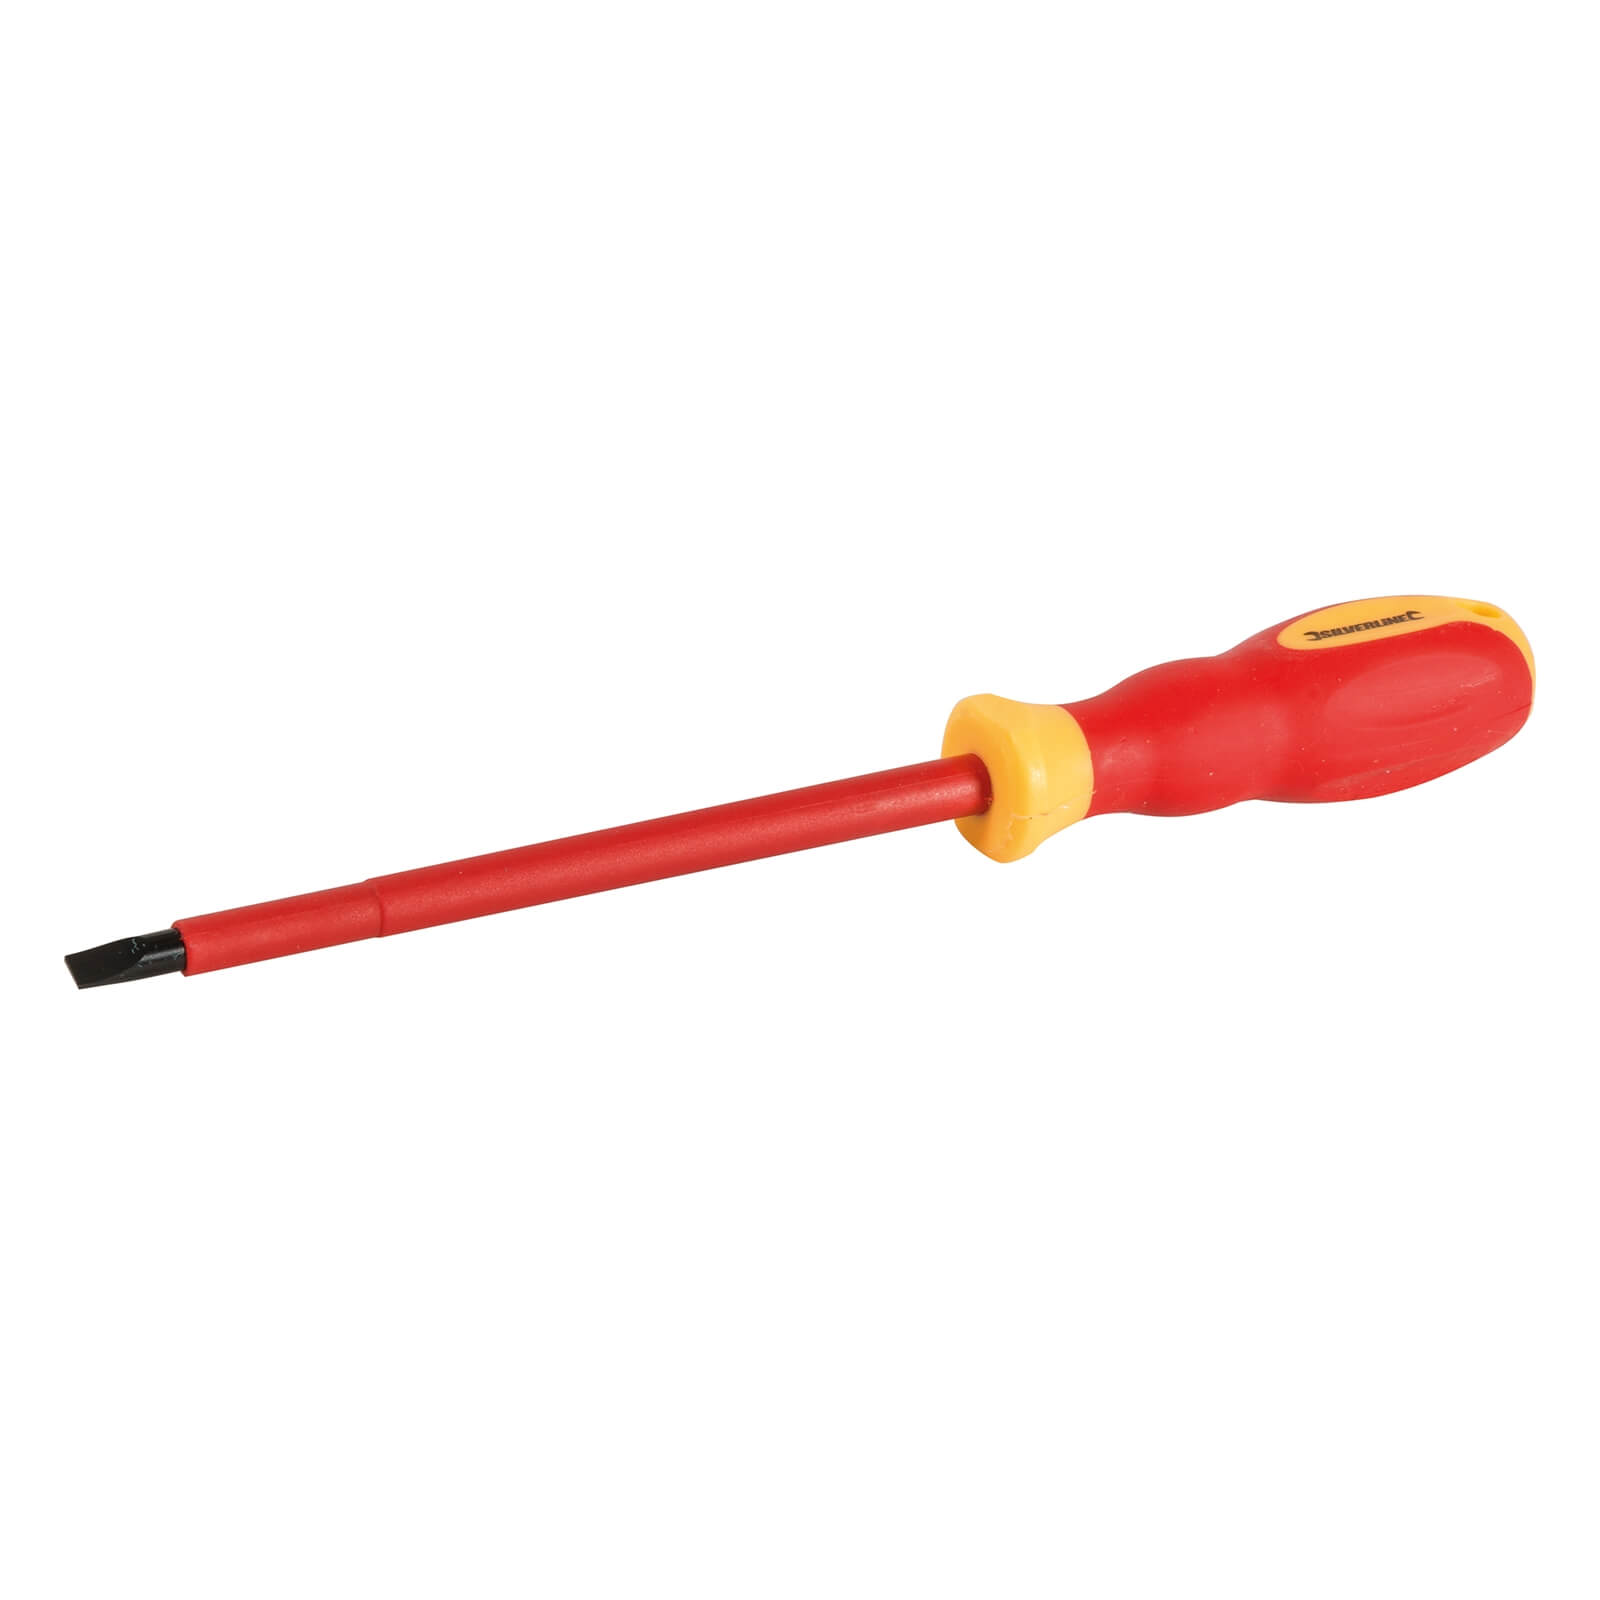 Silverline VDE Soft-Grip Electricians Screwdriver Slotted 1.2 x 6.5 x 150mm